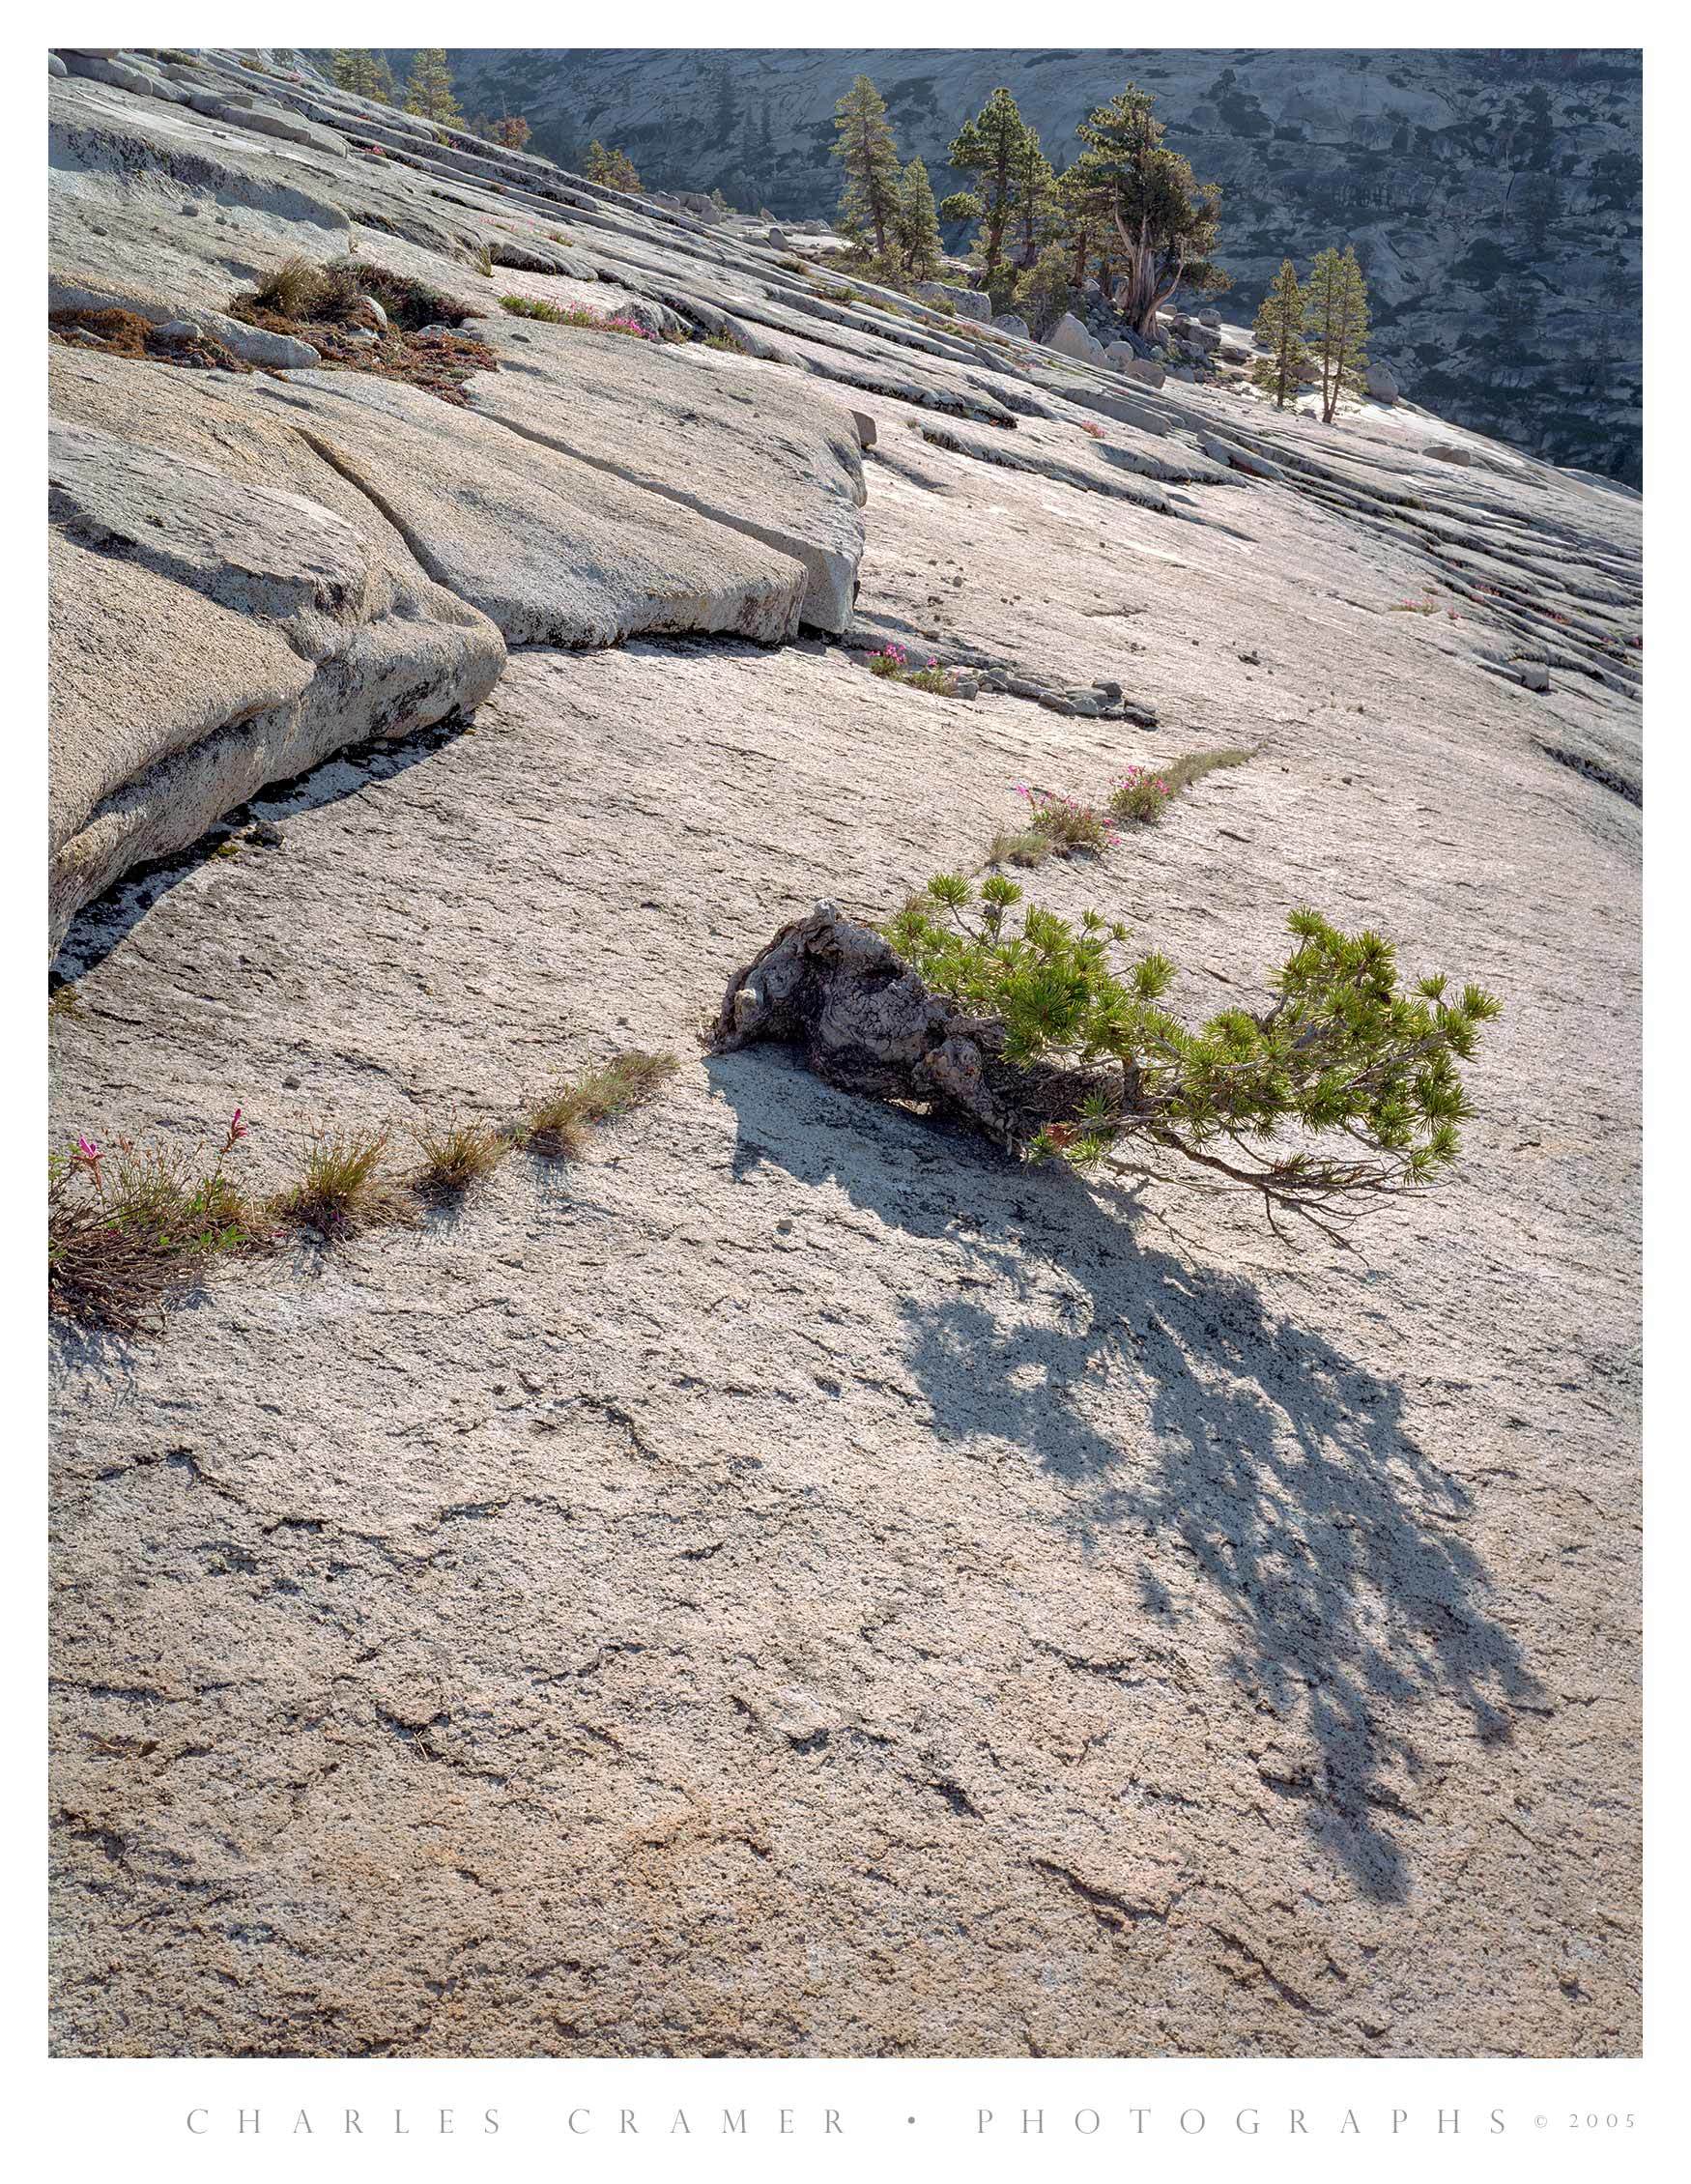 Young Pine, Granite, near Olmsted Point, Yosemite